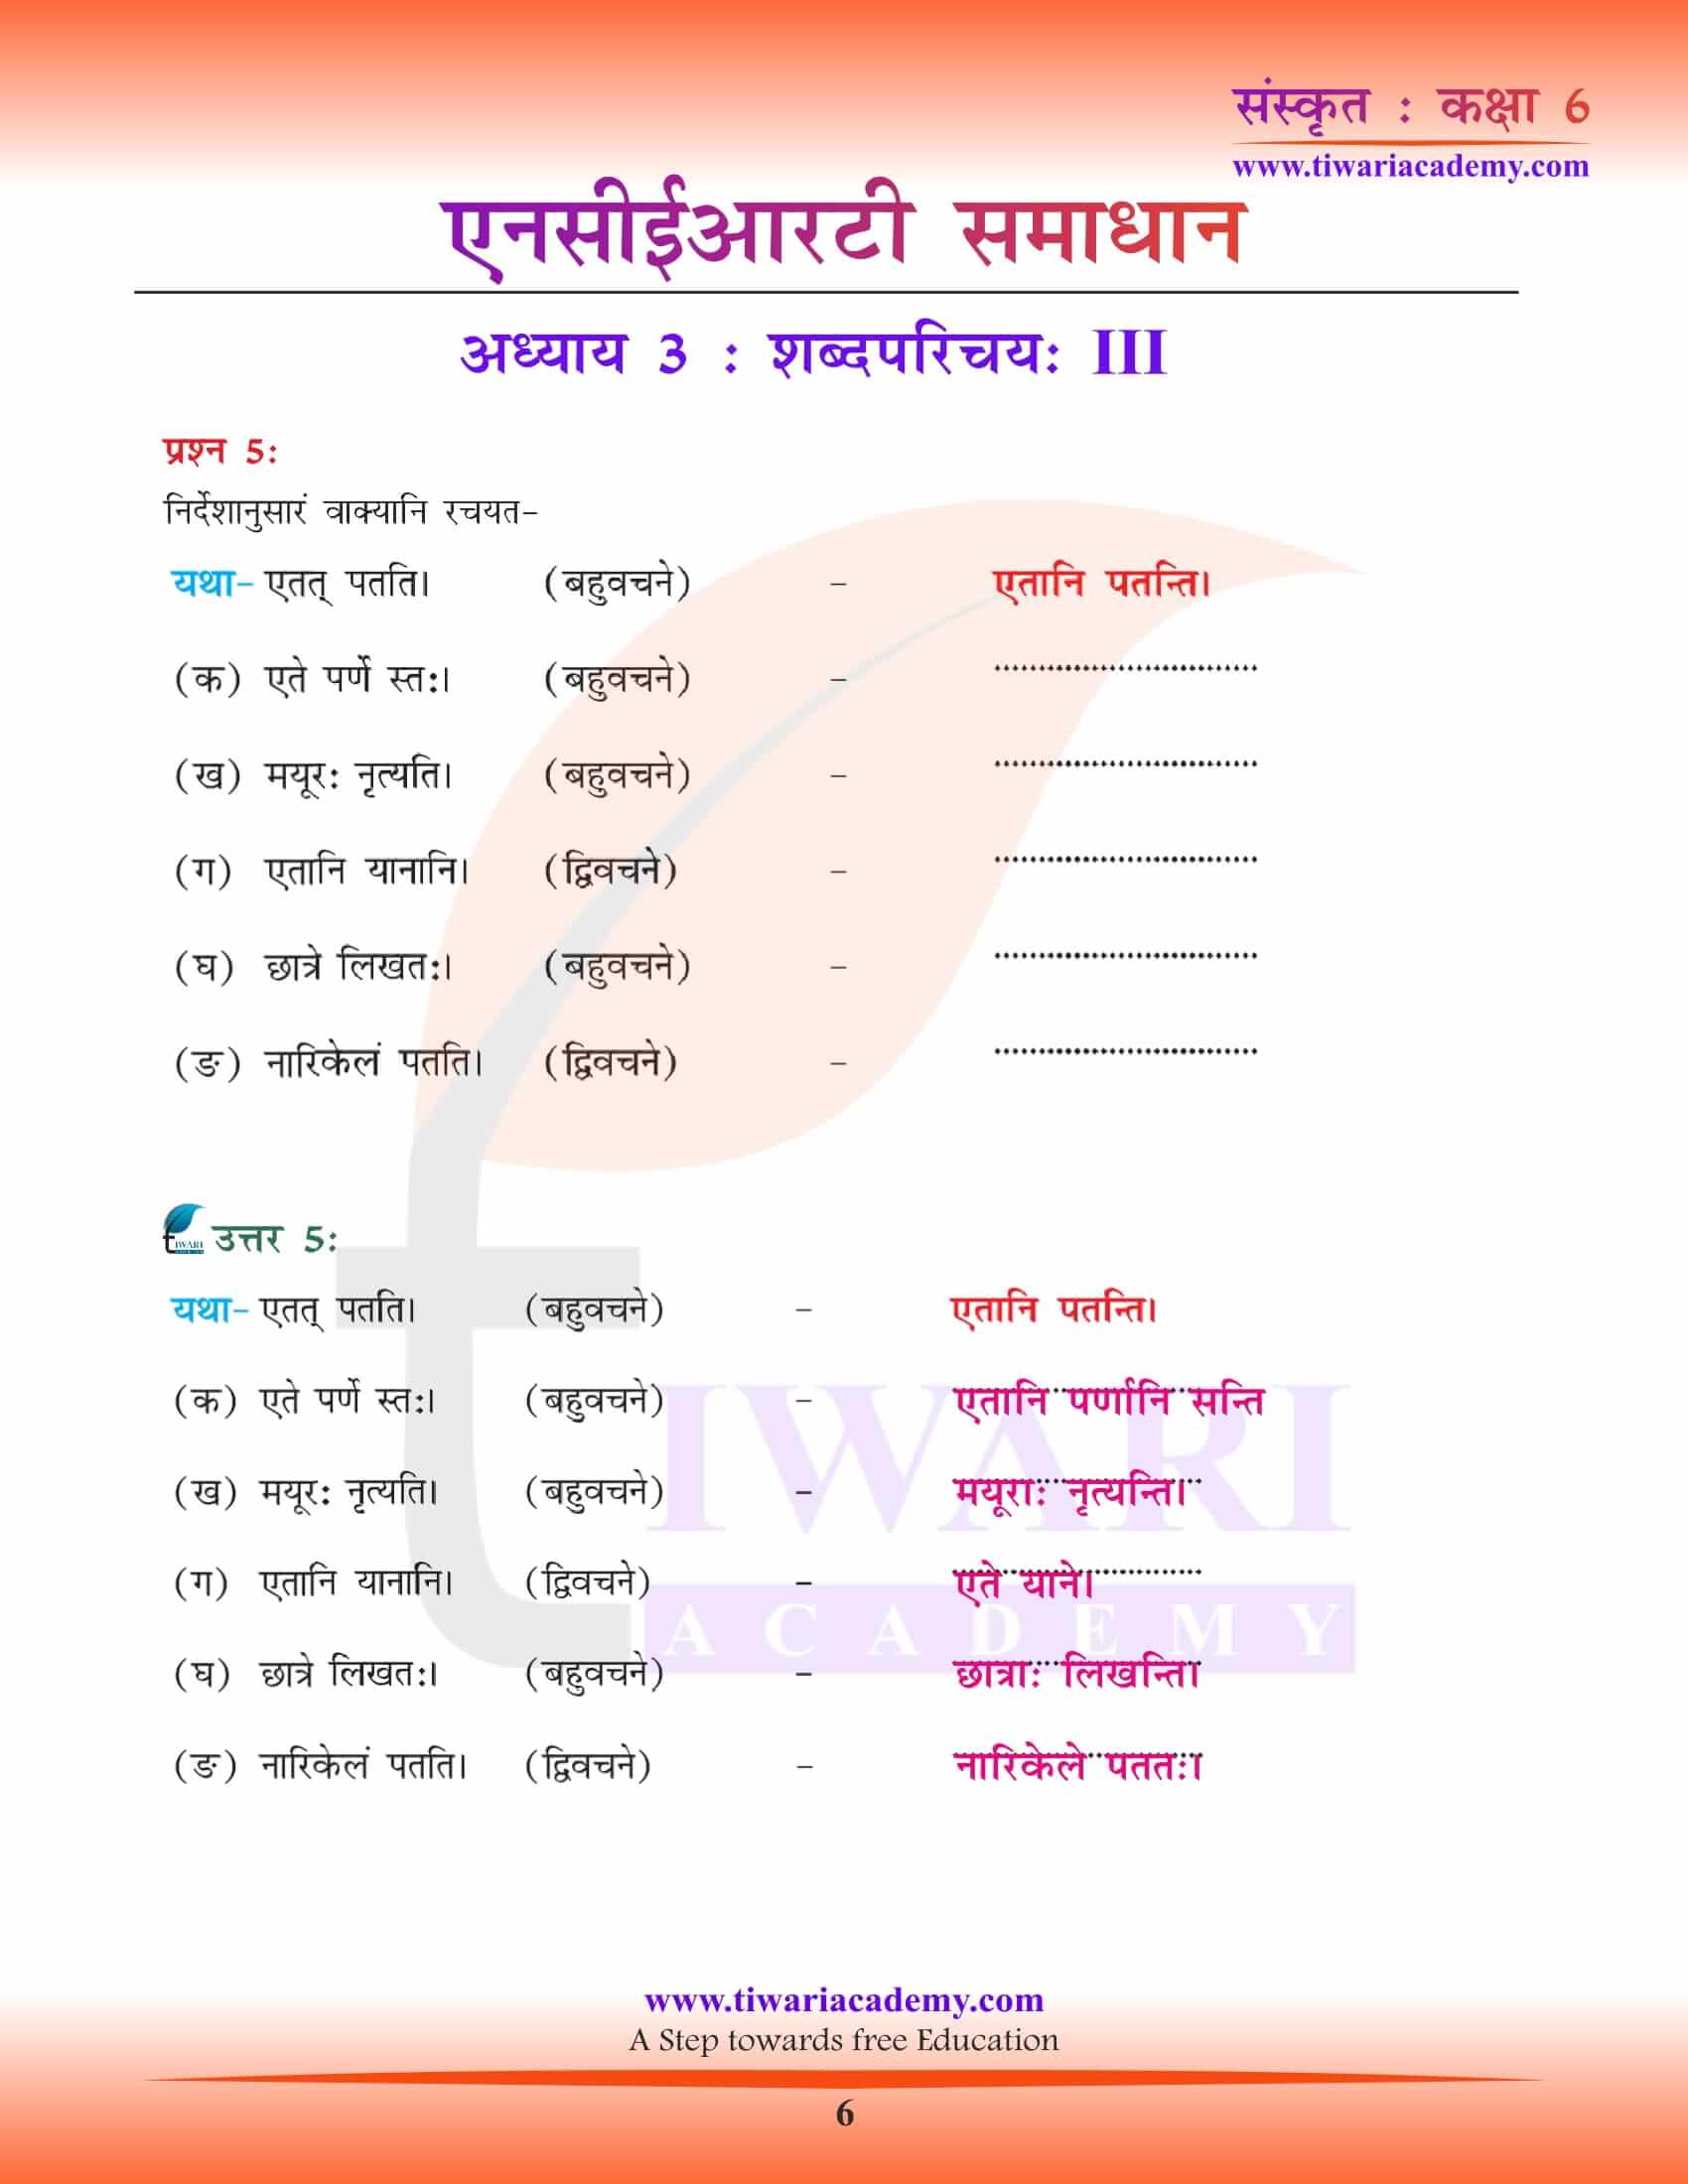 NCERT Solutions for Class 6 Sanskrit Chapter 3 answers